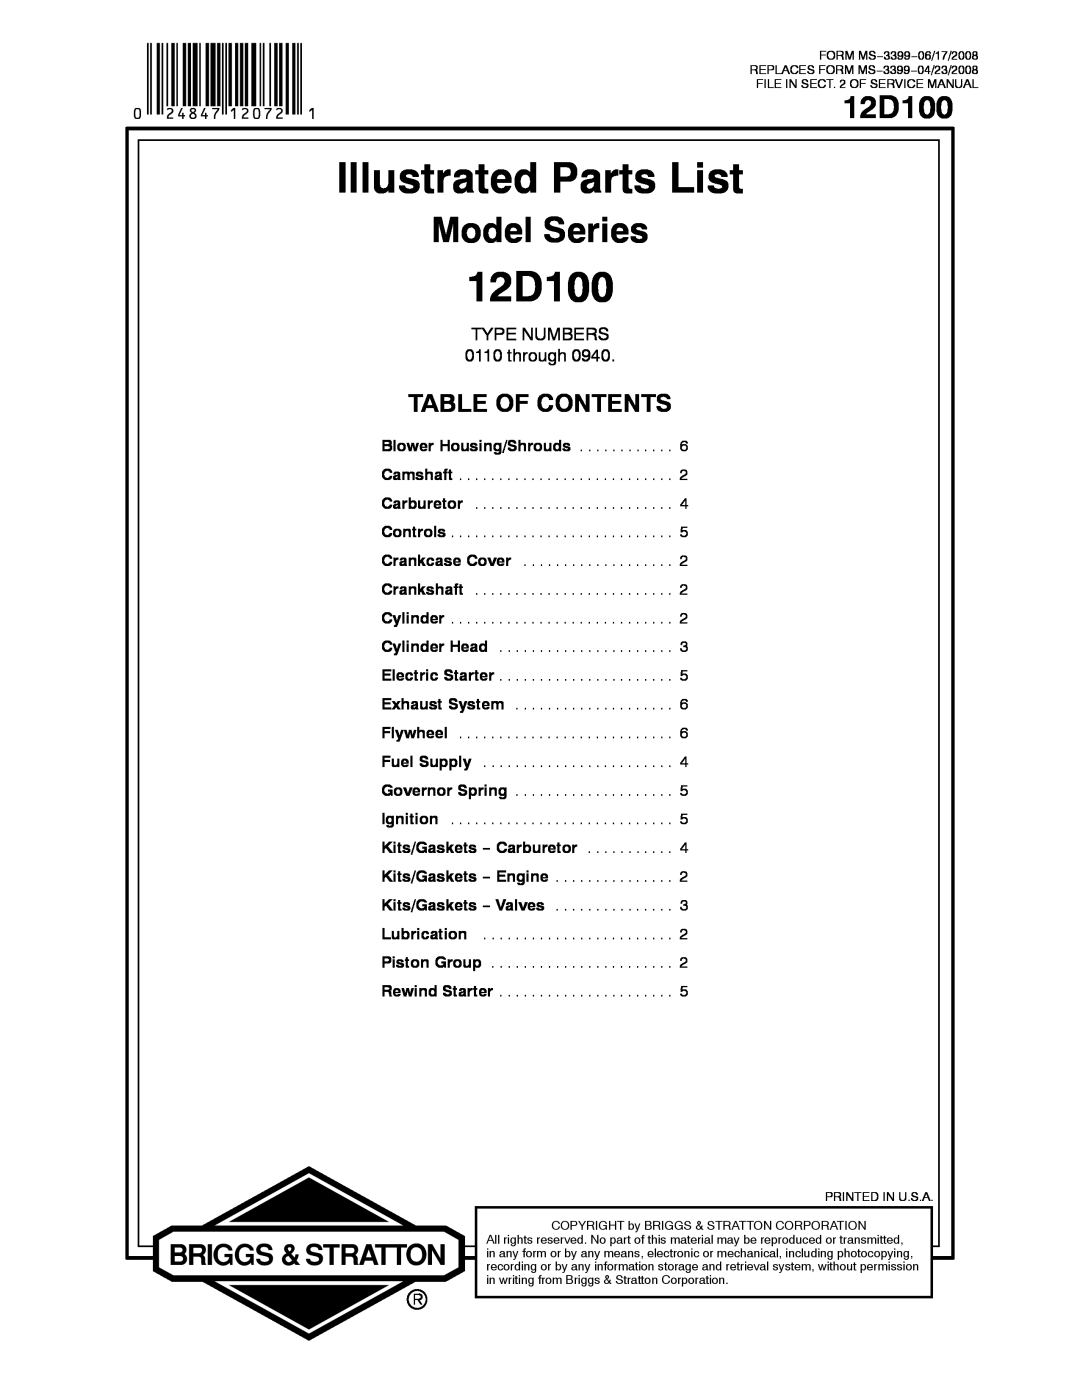 Snapper 12D100 service manual Illustrated Parts List, Model Series, Table Of Contents, TYPE NUMBERS 0110 through 